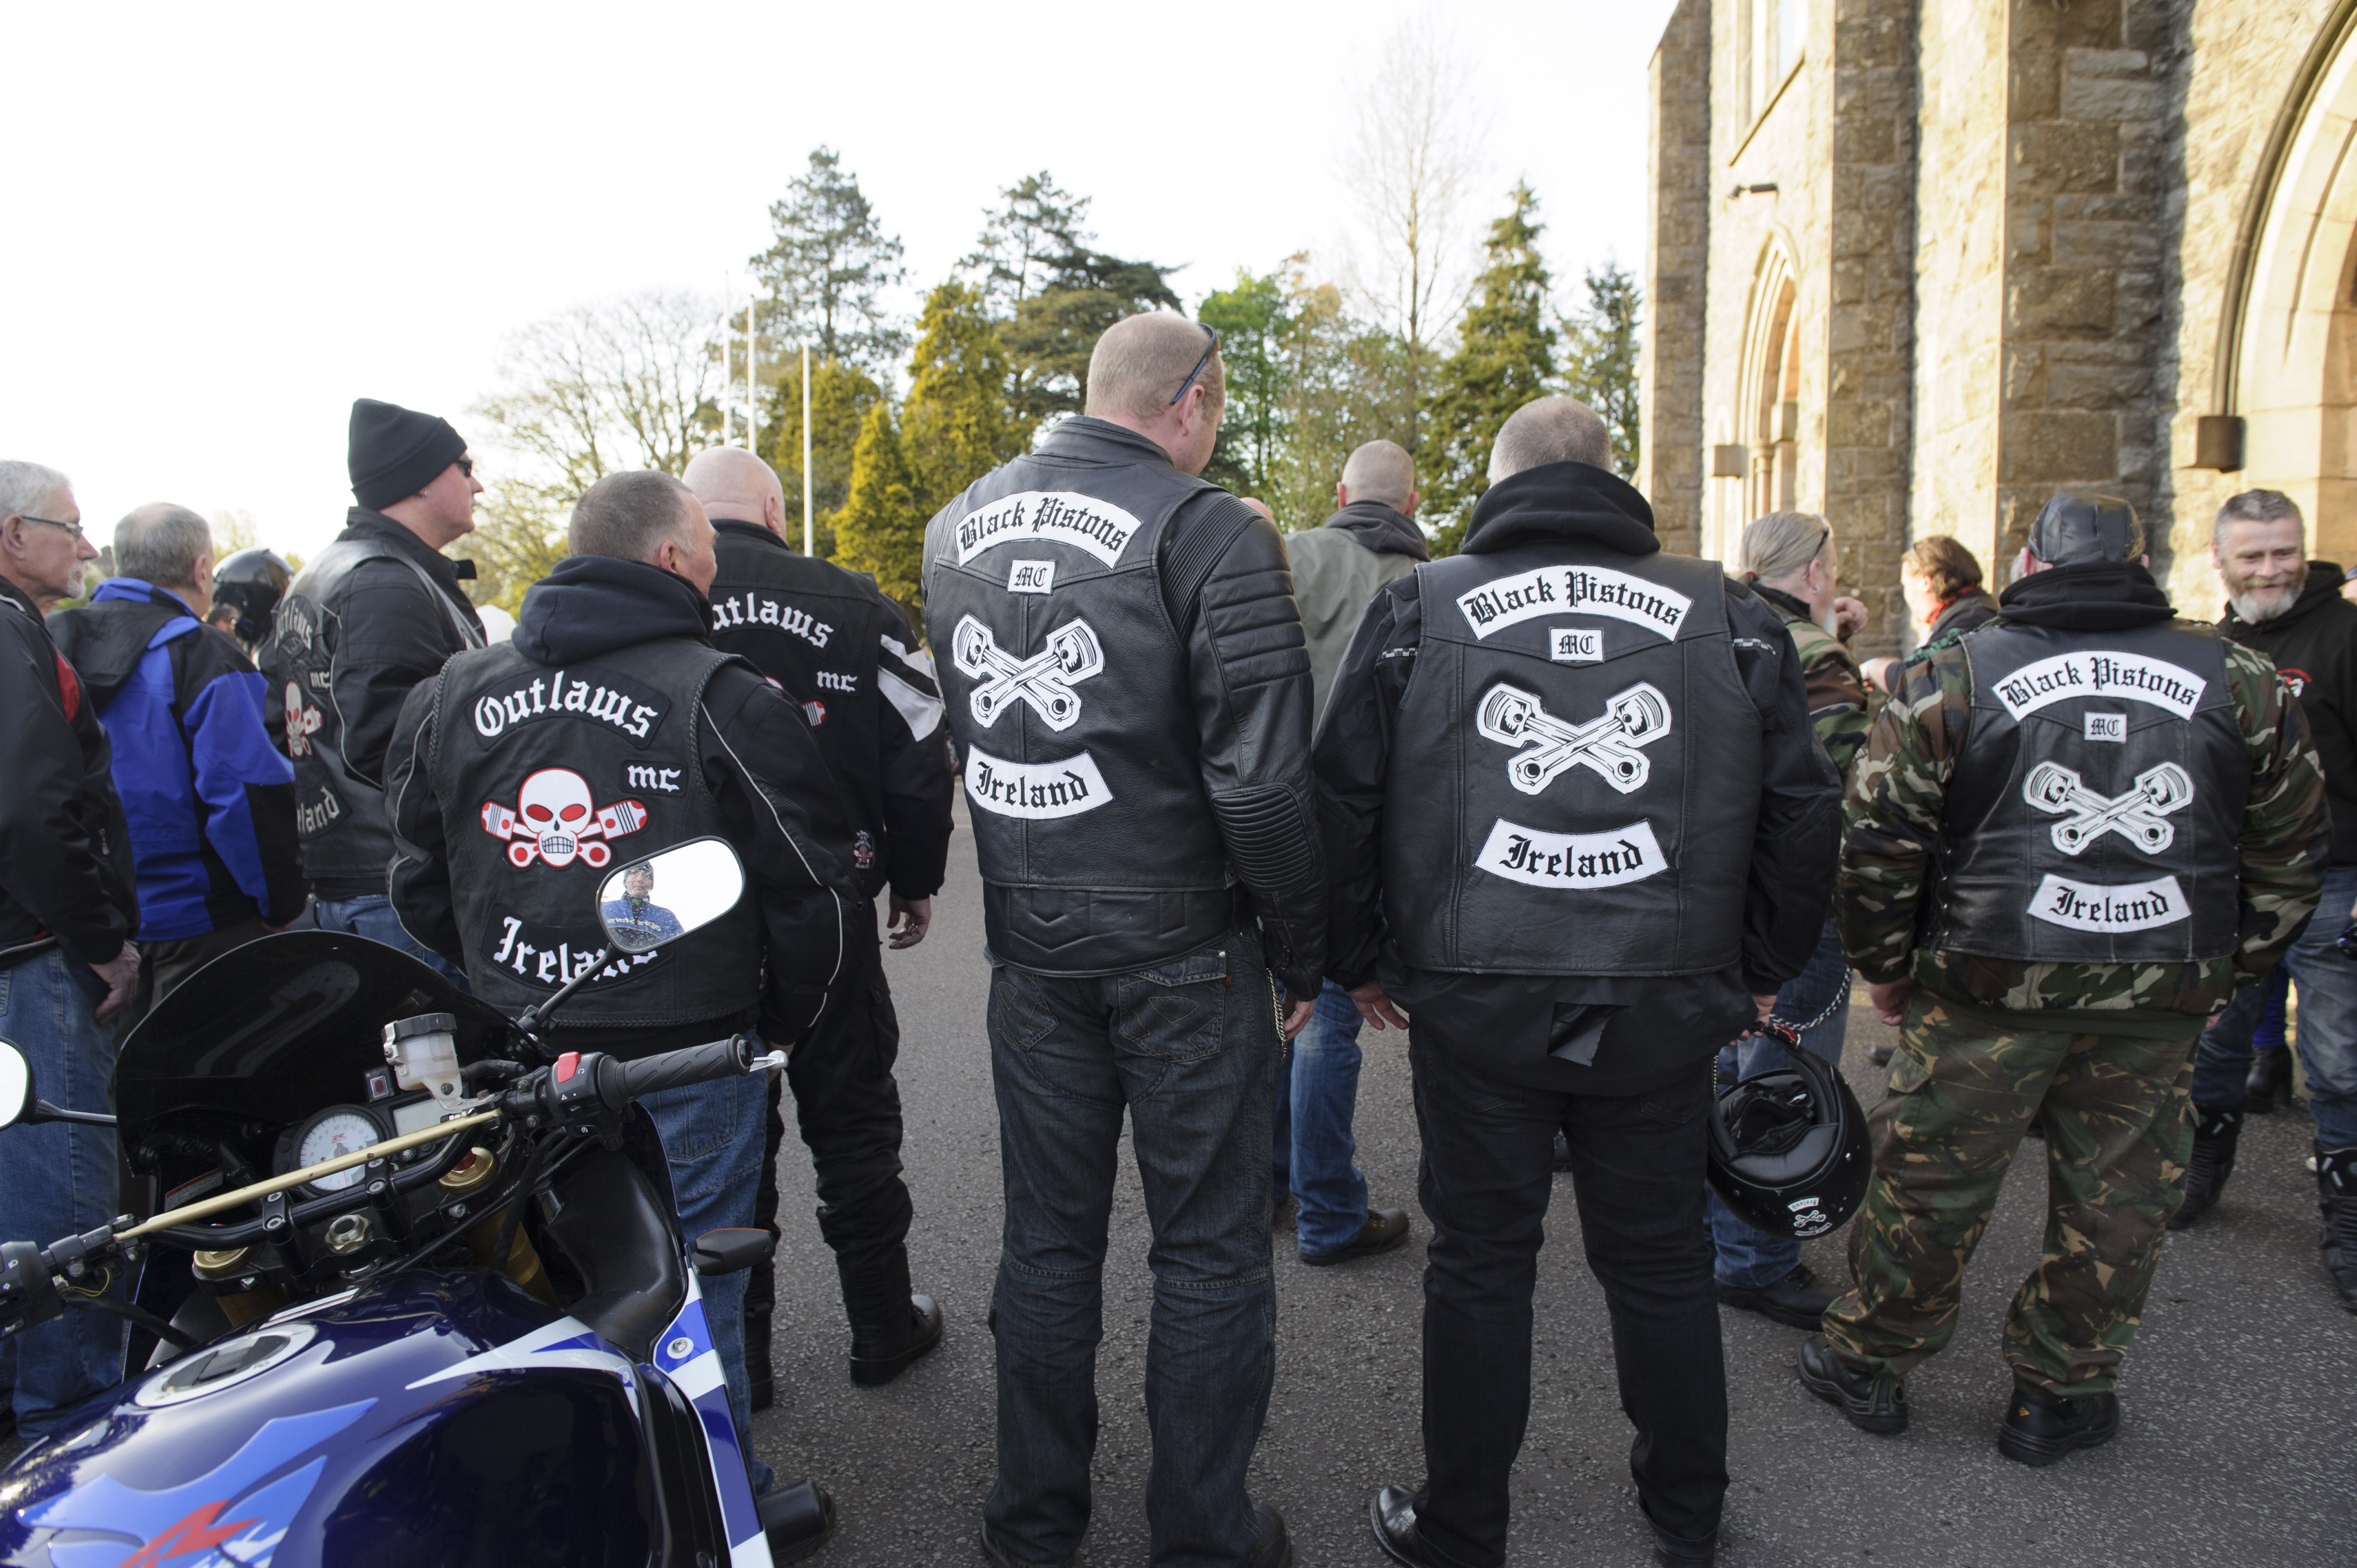 Some of the clubs that attended the Gone But Not Forgotten Bikers Mass at the event last weekend. Â©Rory Geary/The Northern Standard